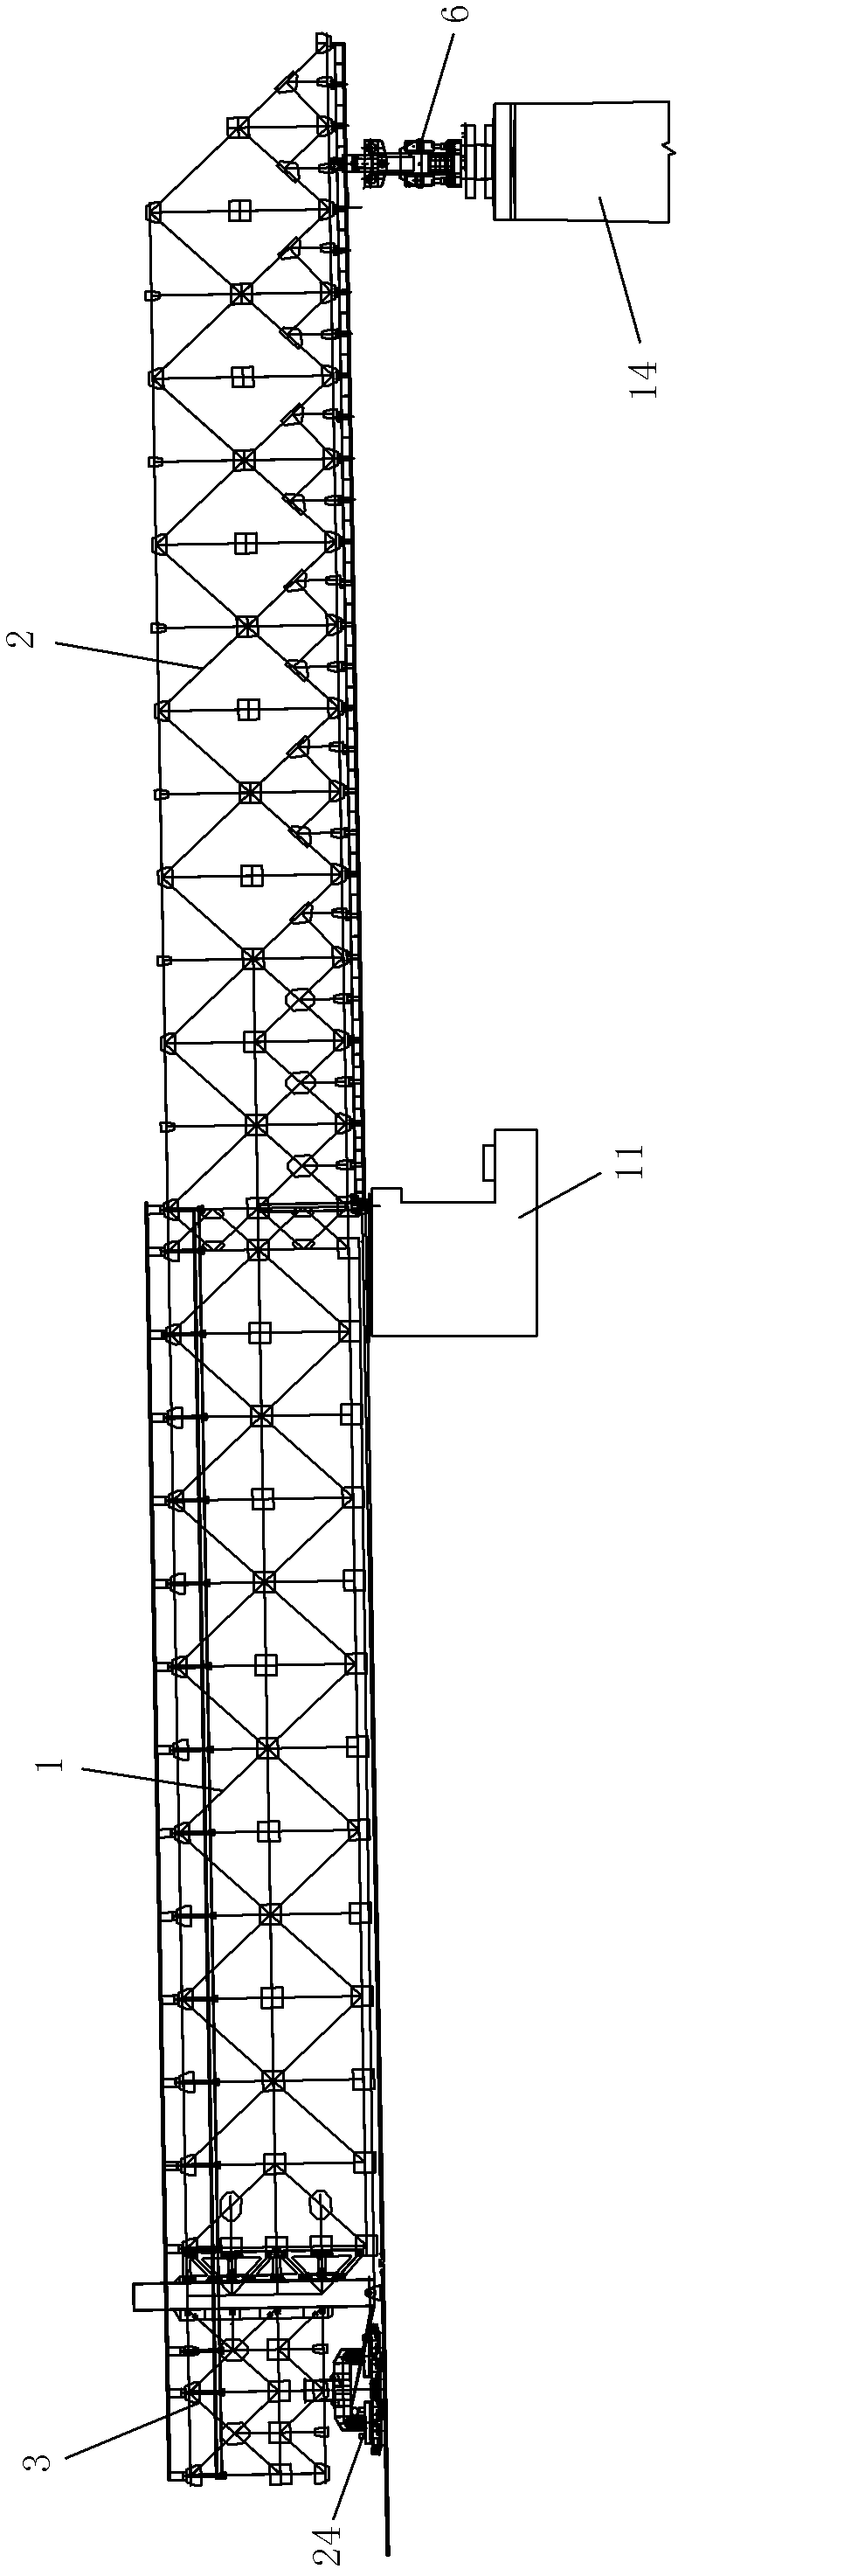 Large-section simply-supported box girder precasting and assembly process under conditions of strong wind and high altitude